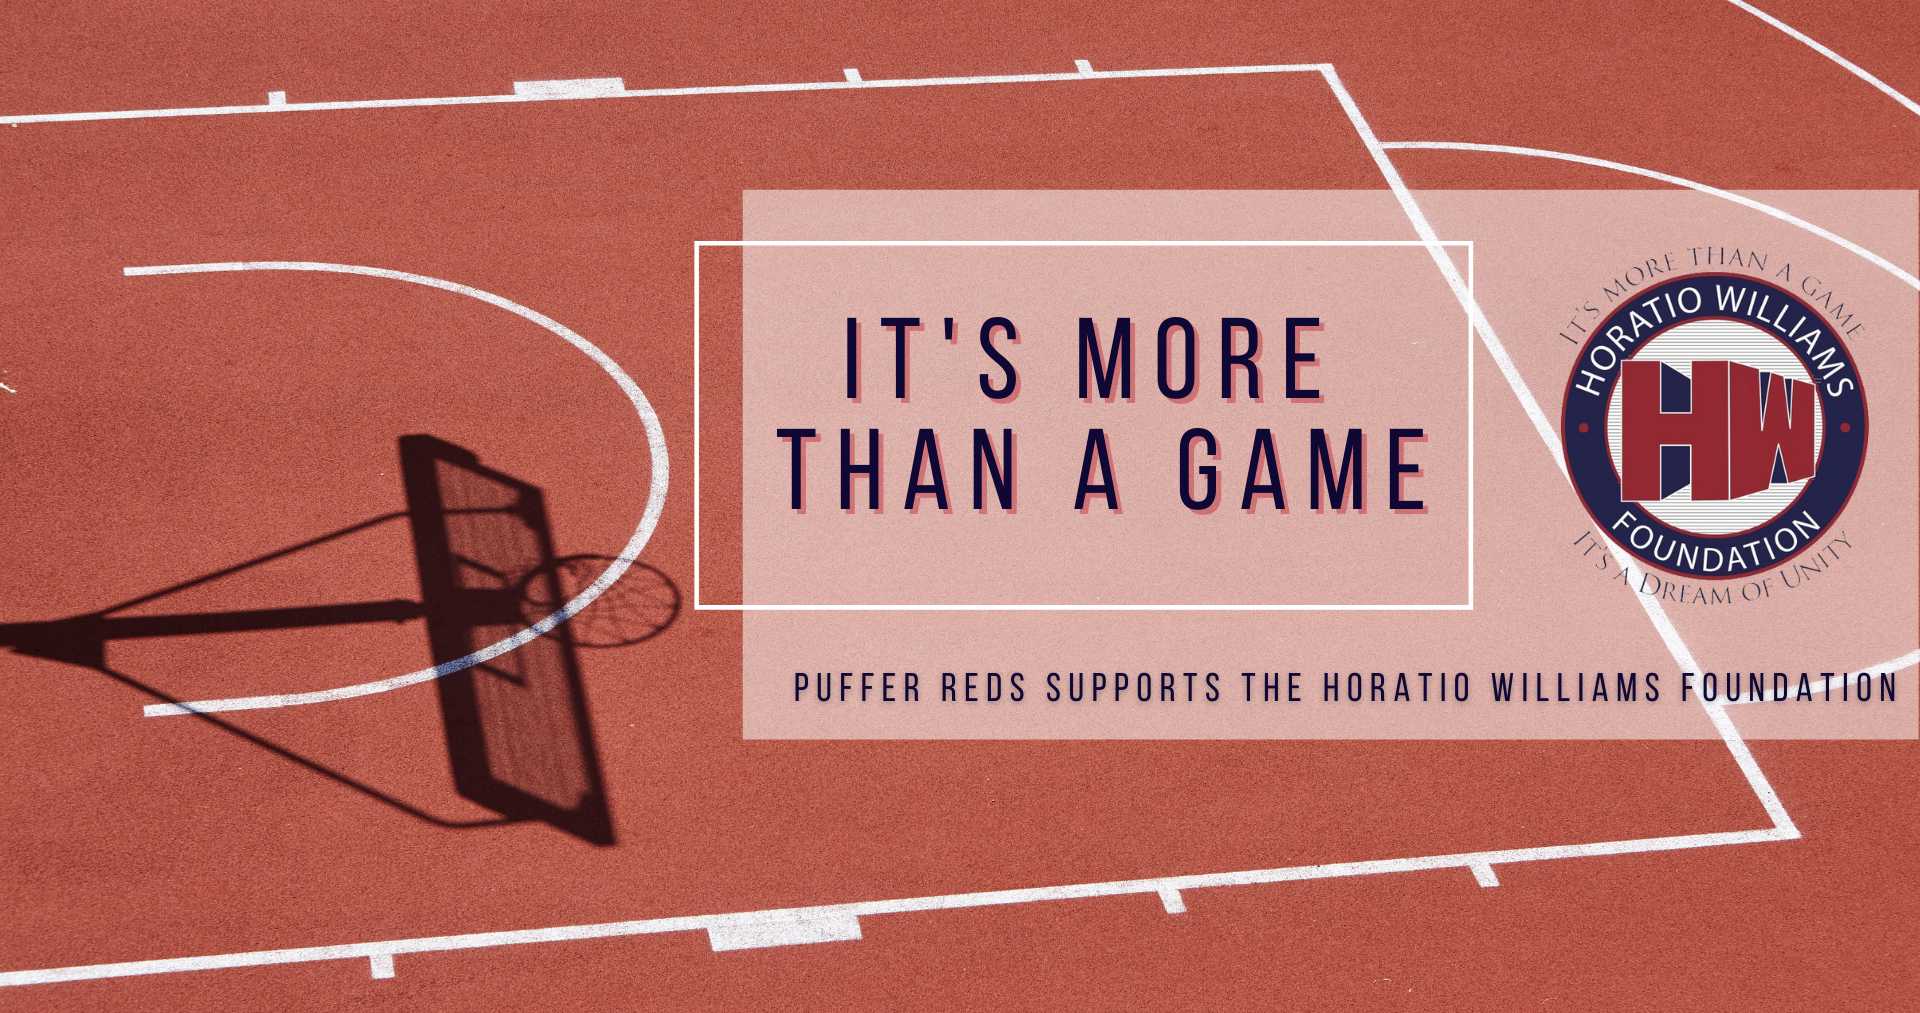 Horatio Williams Foundation: More Than a Game Puffer Reds